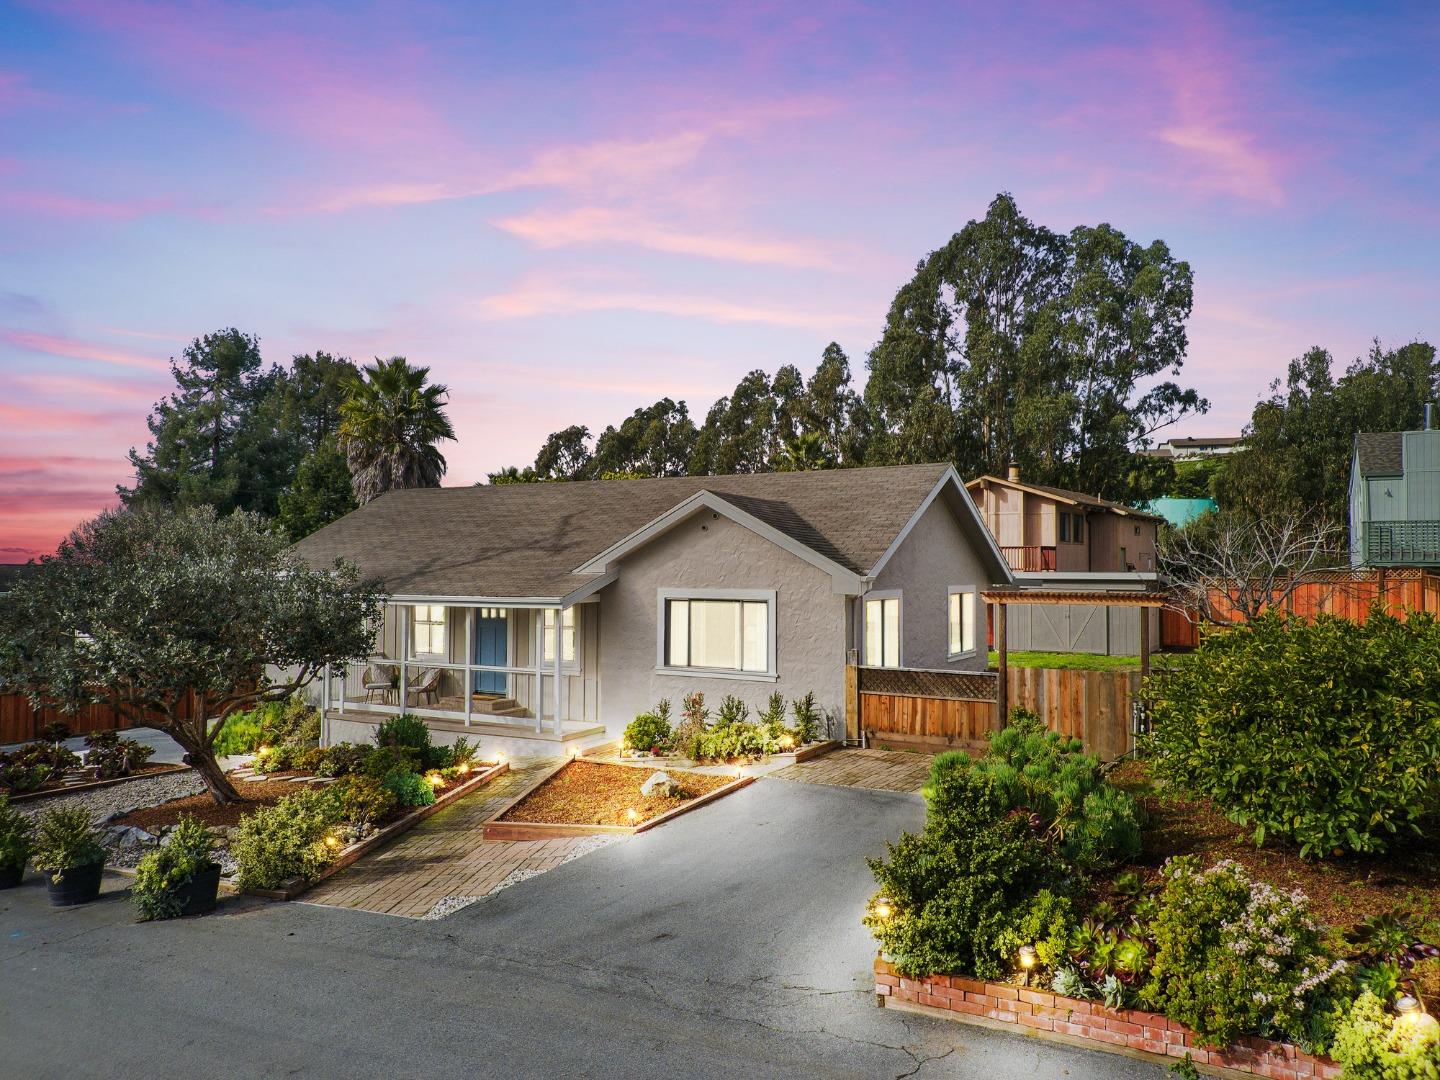 Photo of 3235 Putter Dr in Soquel, CA